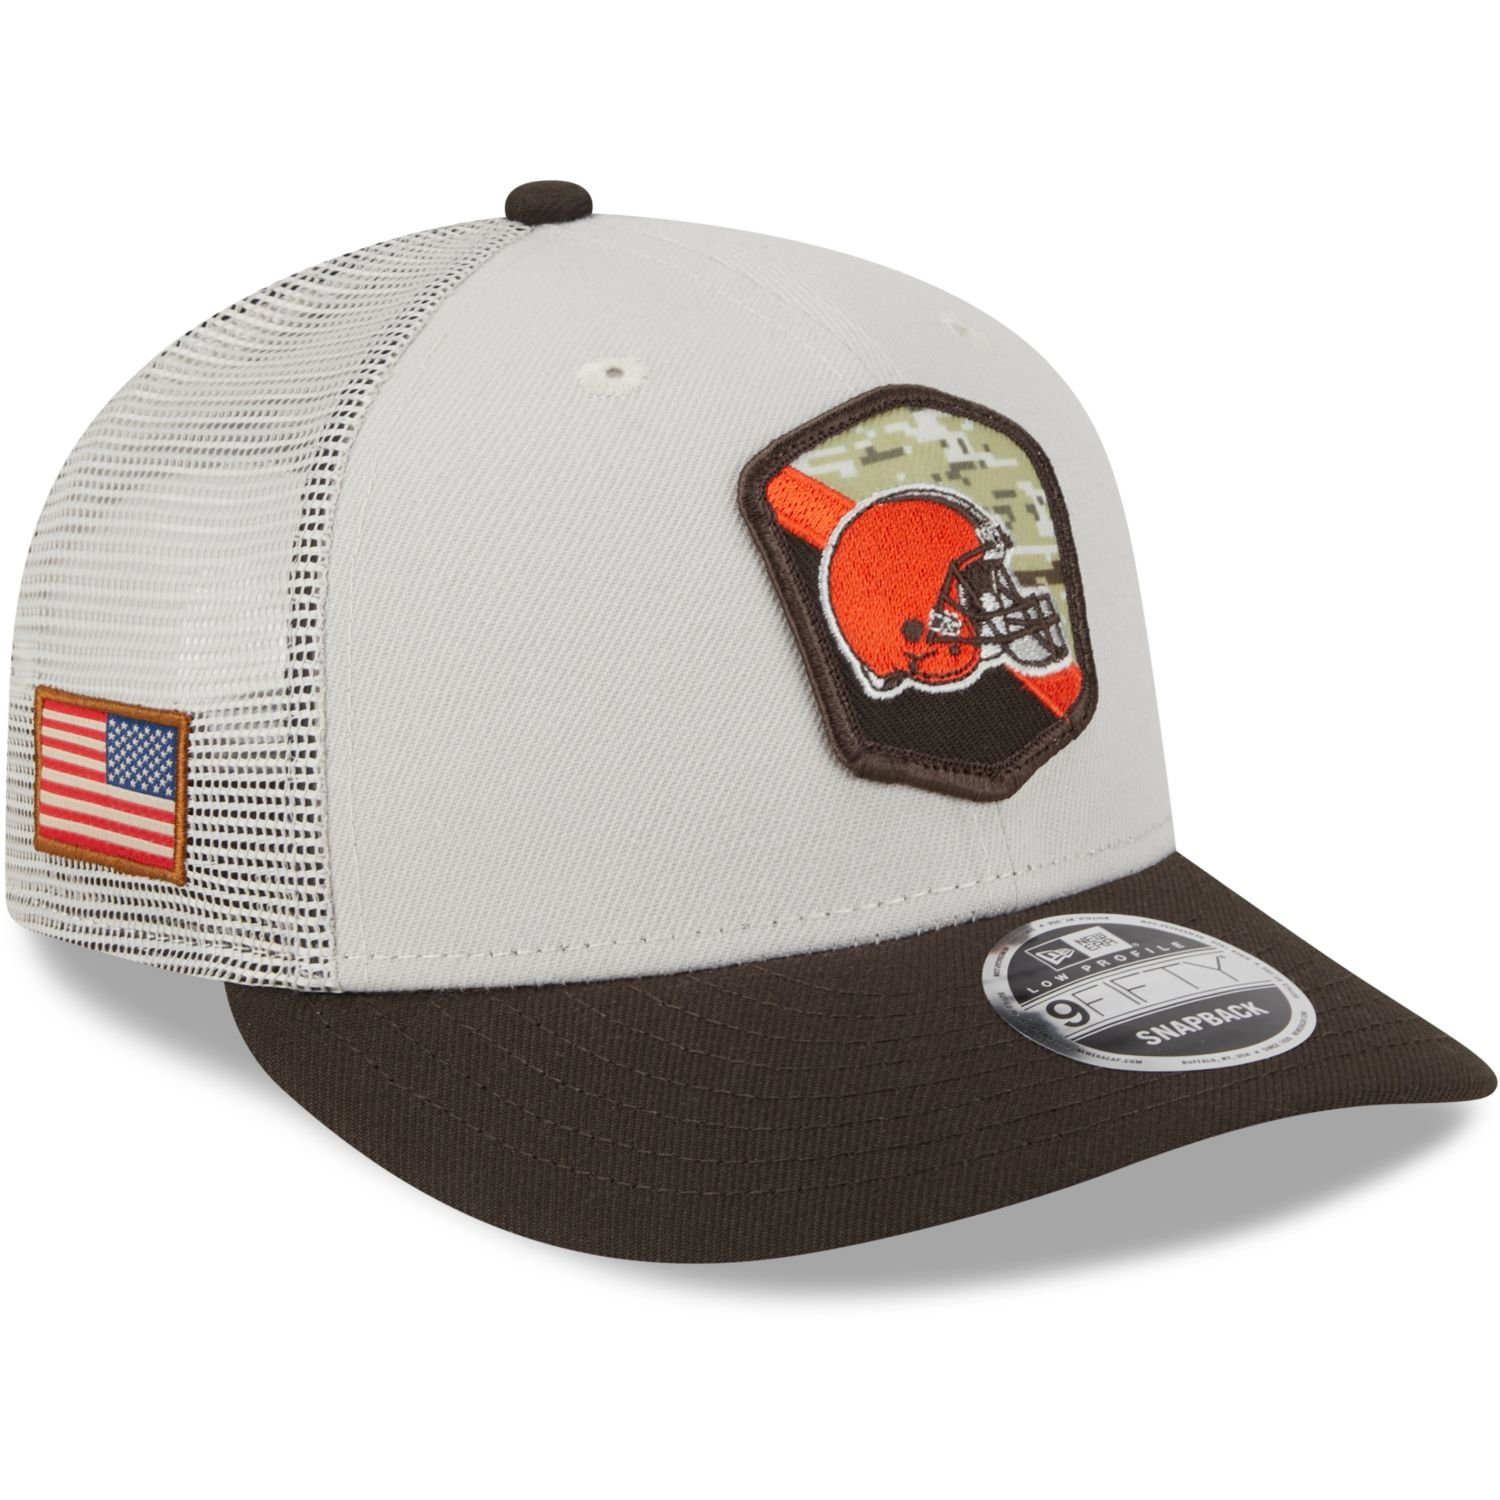 Snap Cleveland 9Fifty Browns Service Era Low Snapback Profile Cap Salute to NFL New